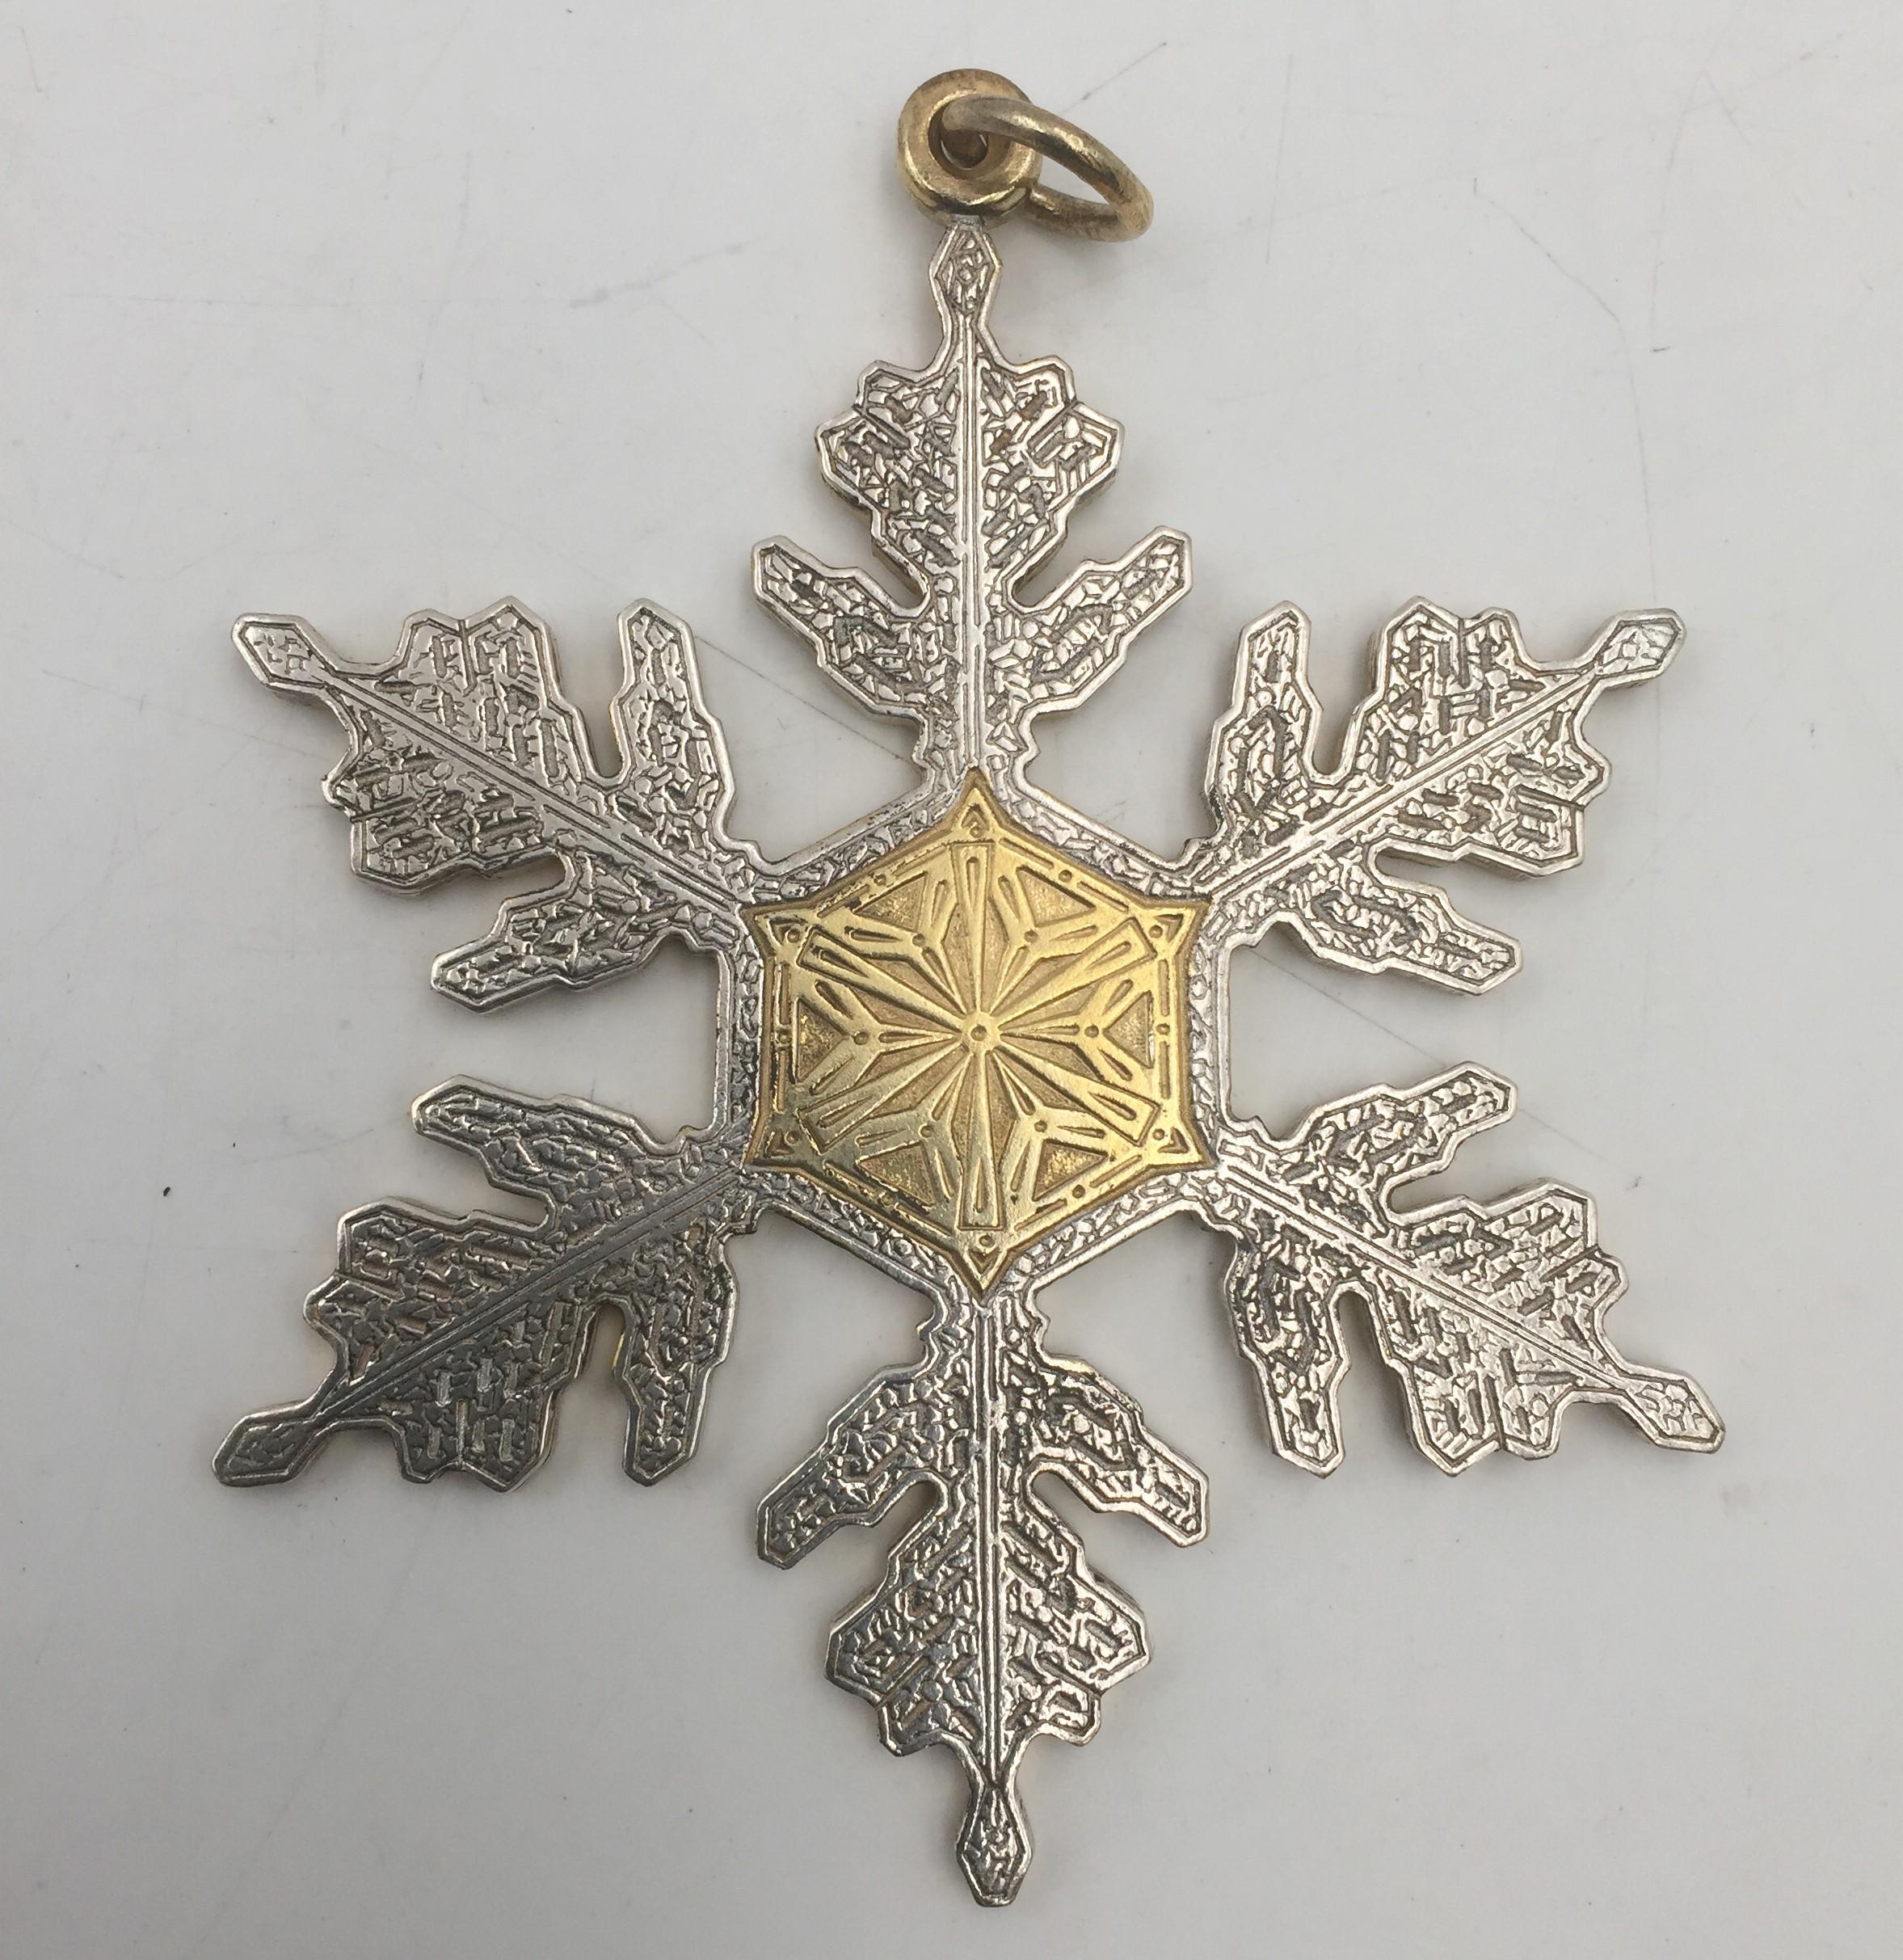 Exceptional assortment of 6 Buccellati sterling silver Christmas ornaments, all made in Italy, consisting of:

- an engraved snowflake, gilt at the center and on top, measuring 3 1/2'' in height by 3'' in width

- a winter village scene in